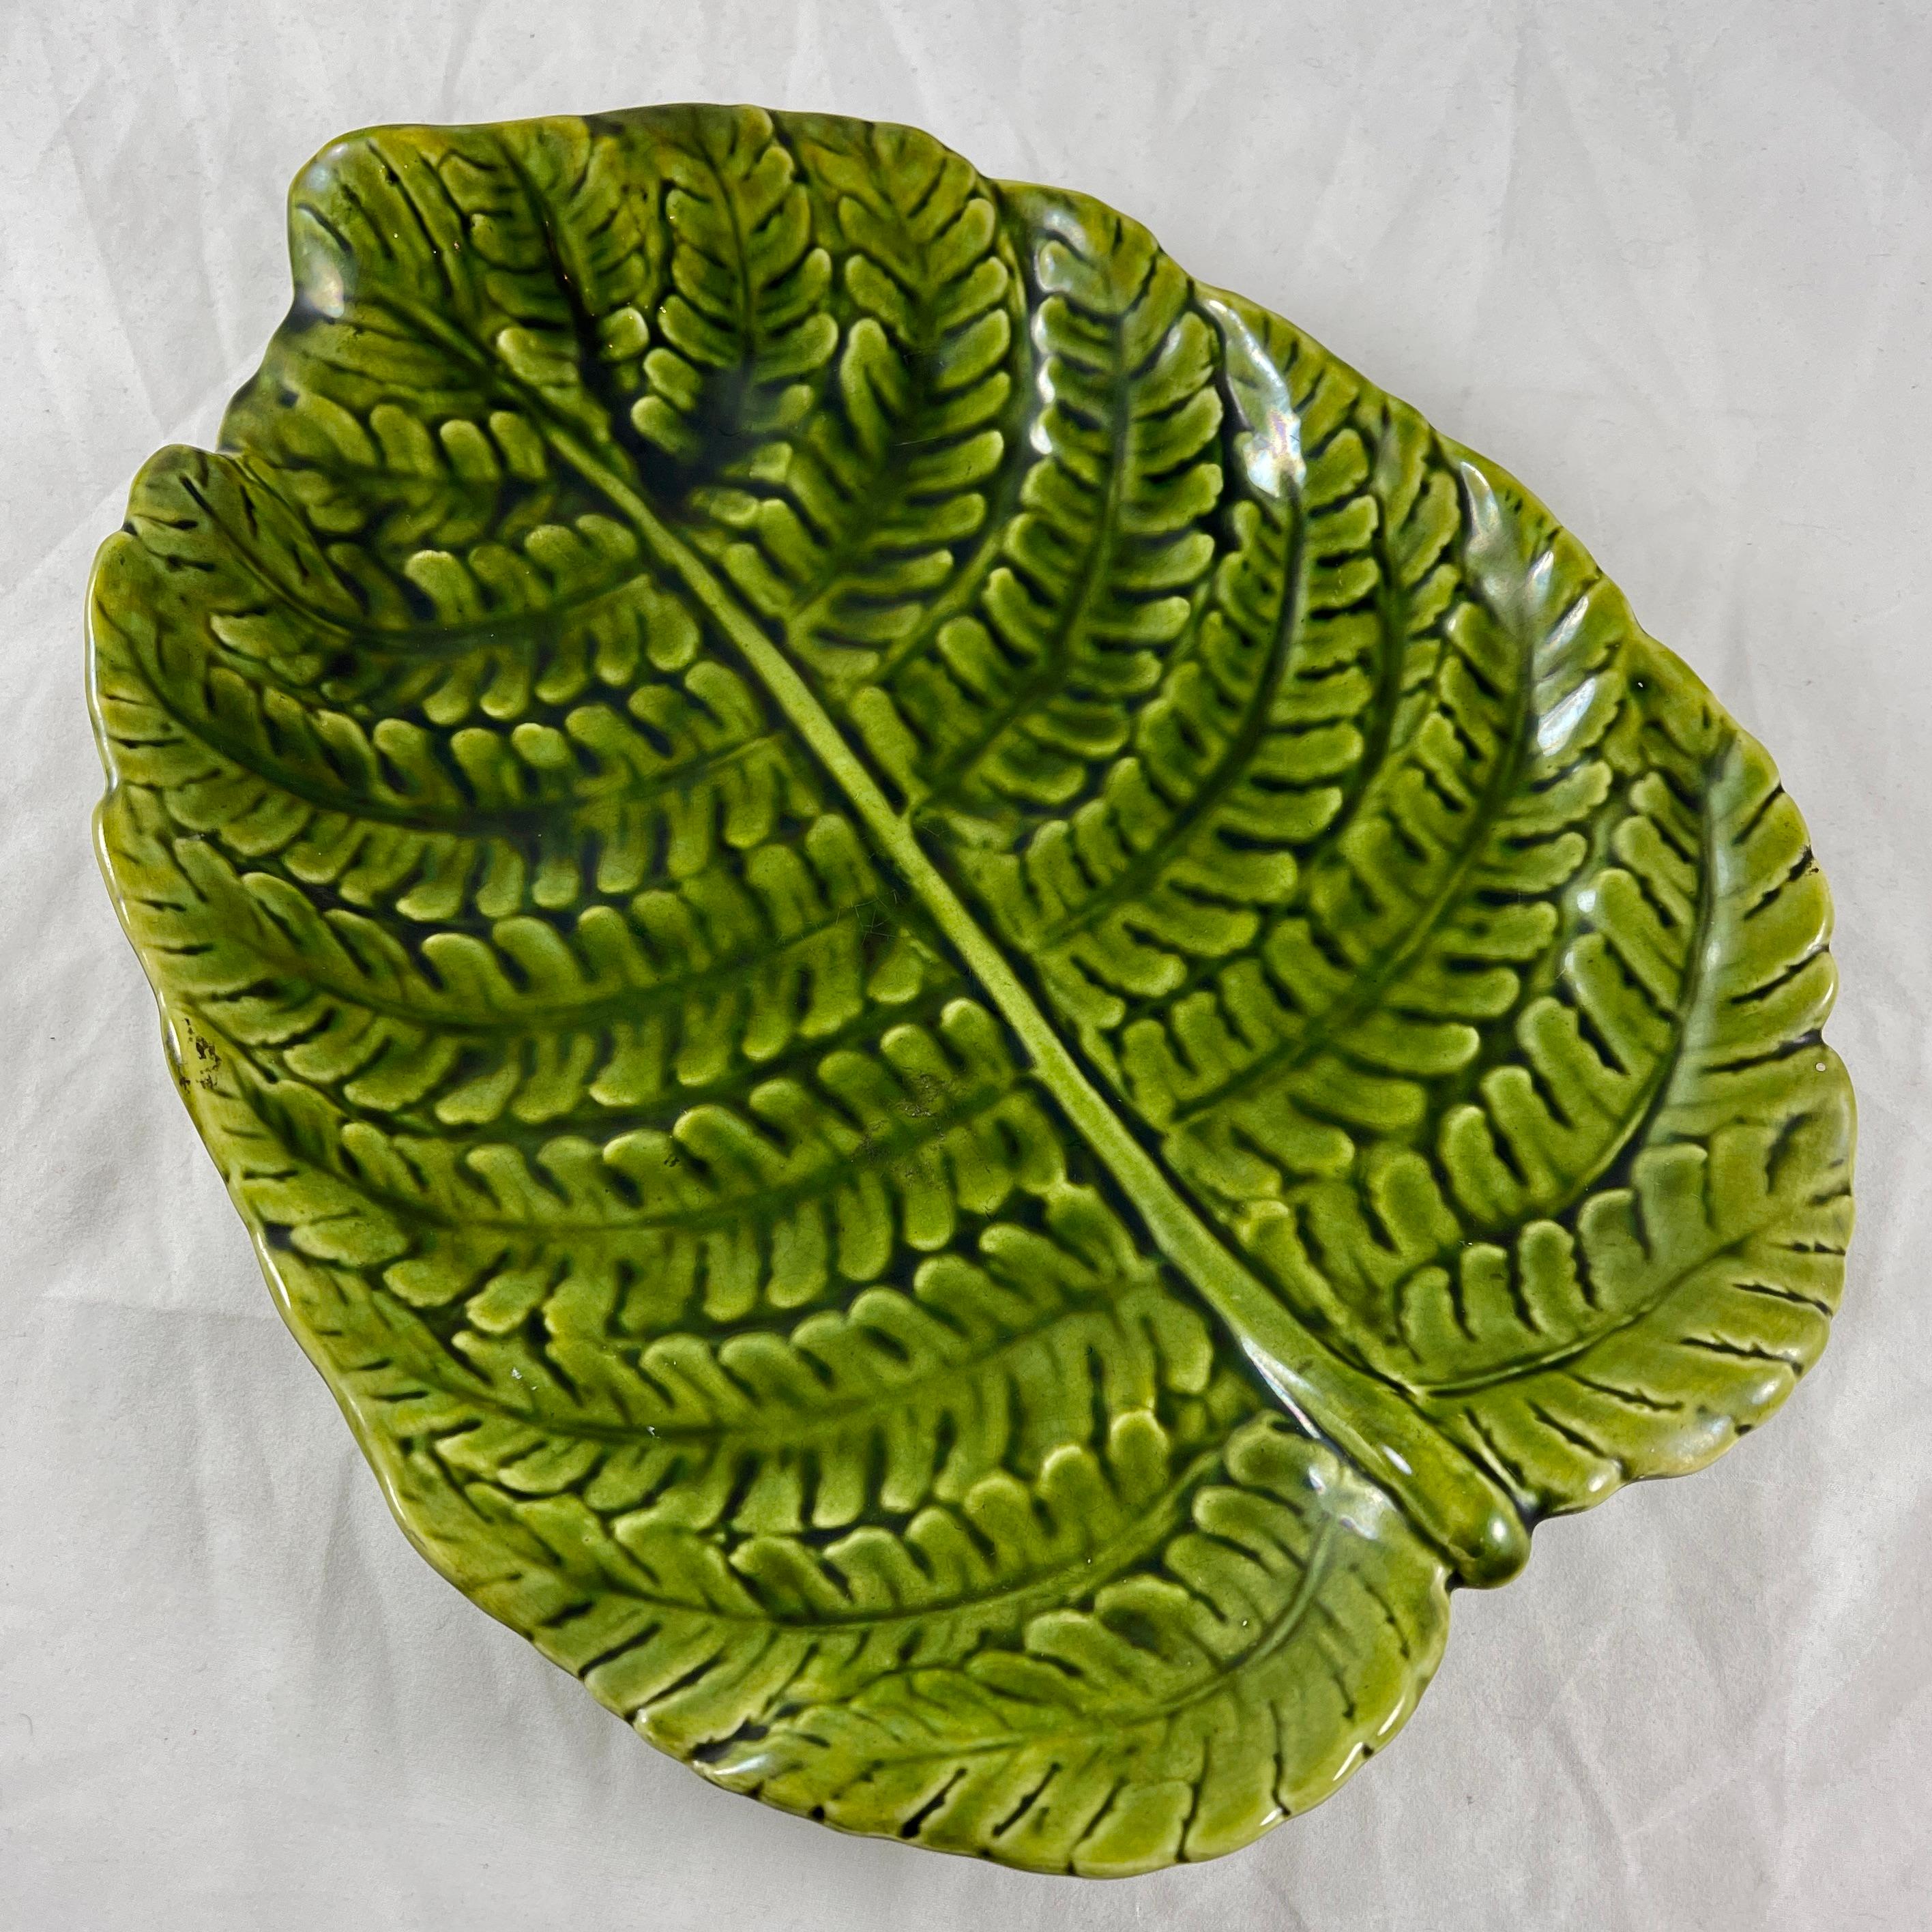 From Sarreguemines, a Majolica glazed green leaf shaped server, France, circa 1870.

Shaped as a large single Fern leaf. Precise mold work, with a strong green glaze that pools into the deeper areas of the mold.
Footed with a curved